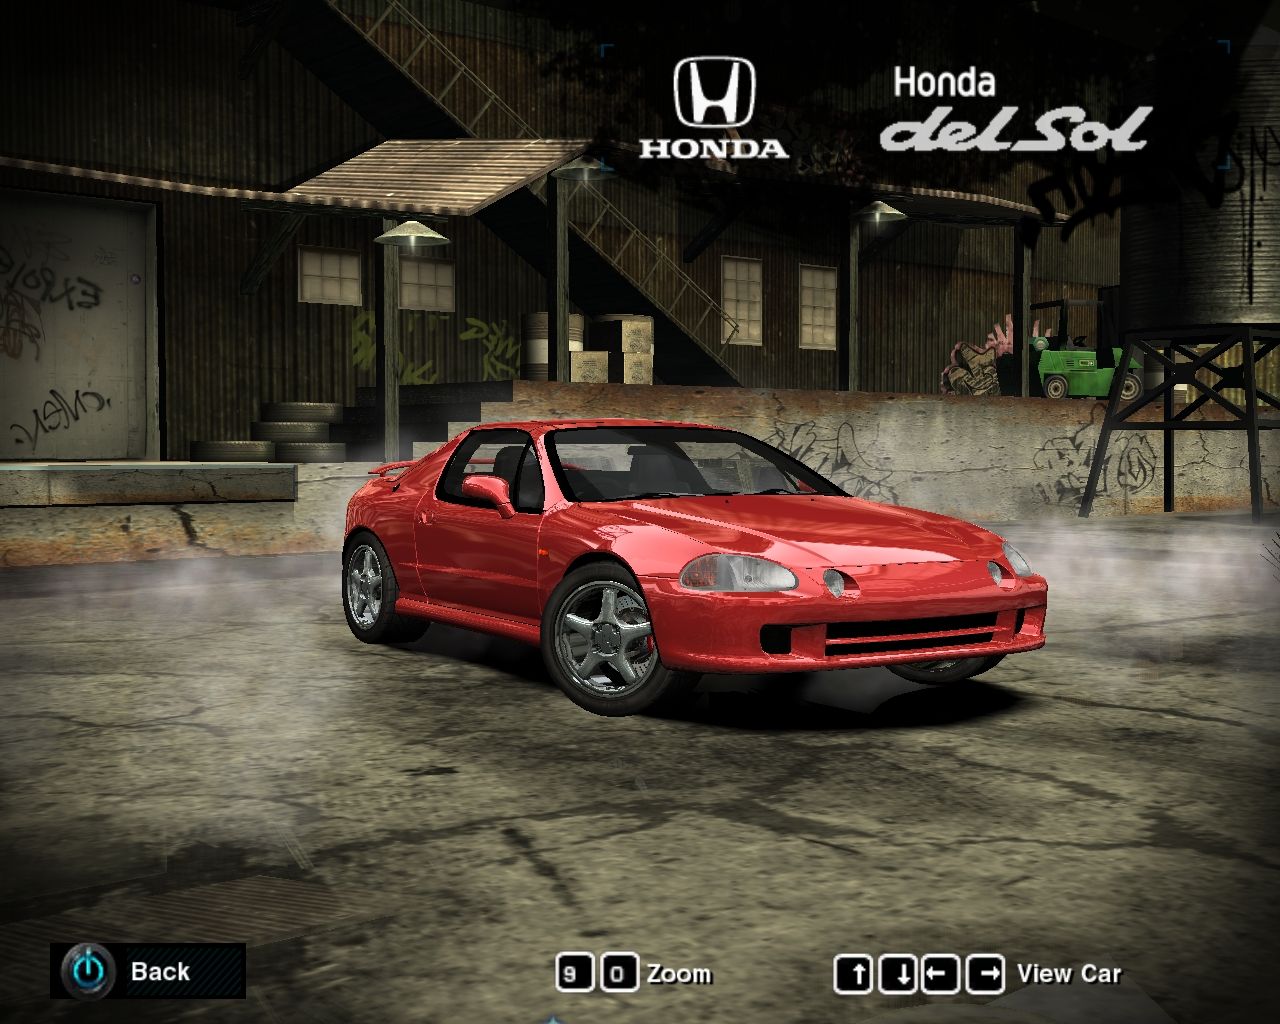 Honda Civic Del Sol by LRF Modding. Need For Speed Most Wanted